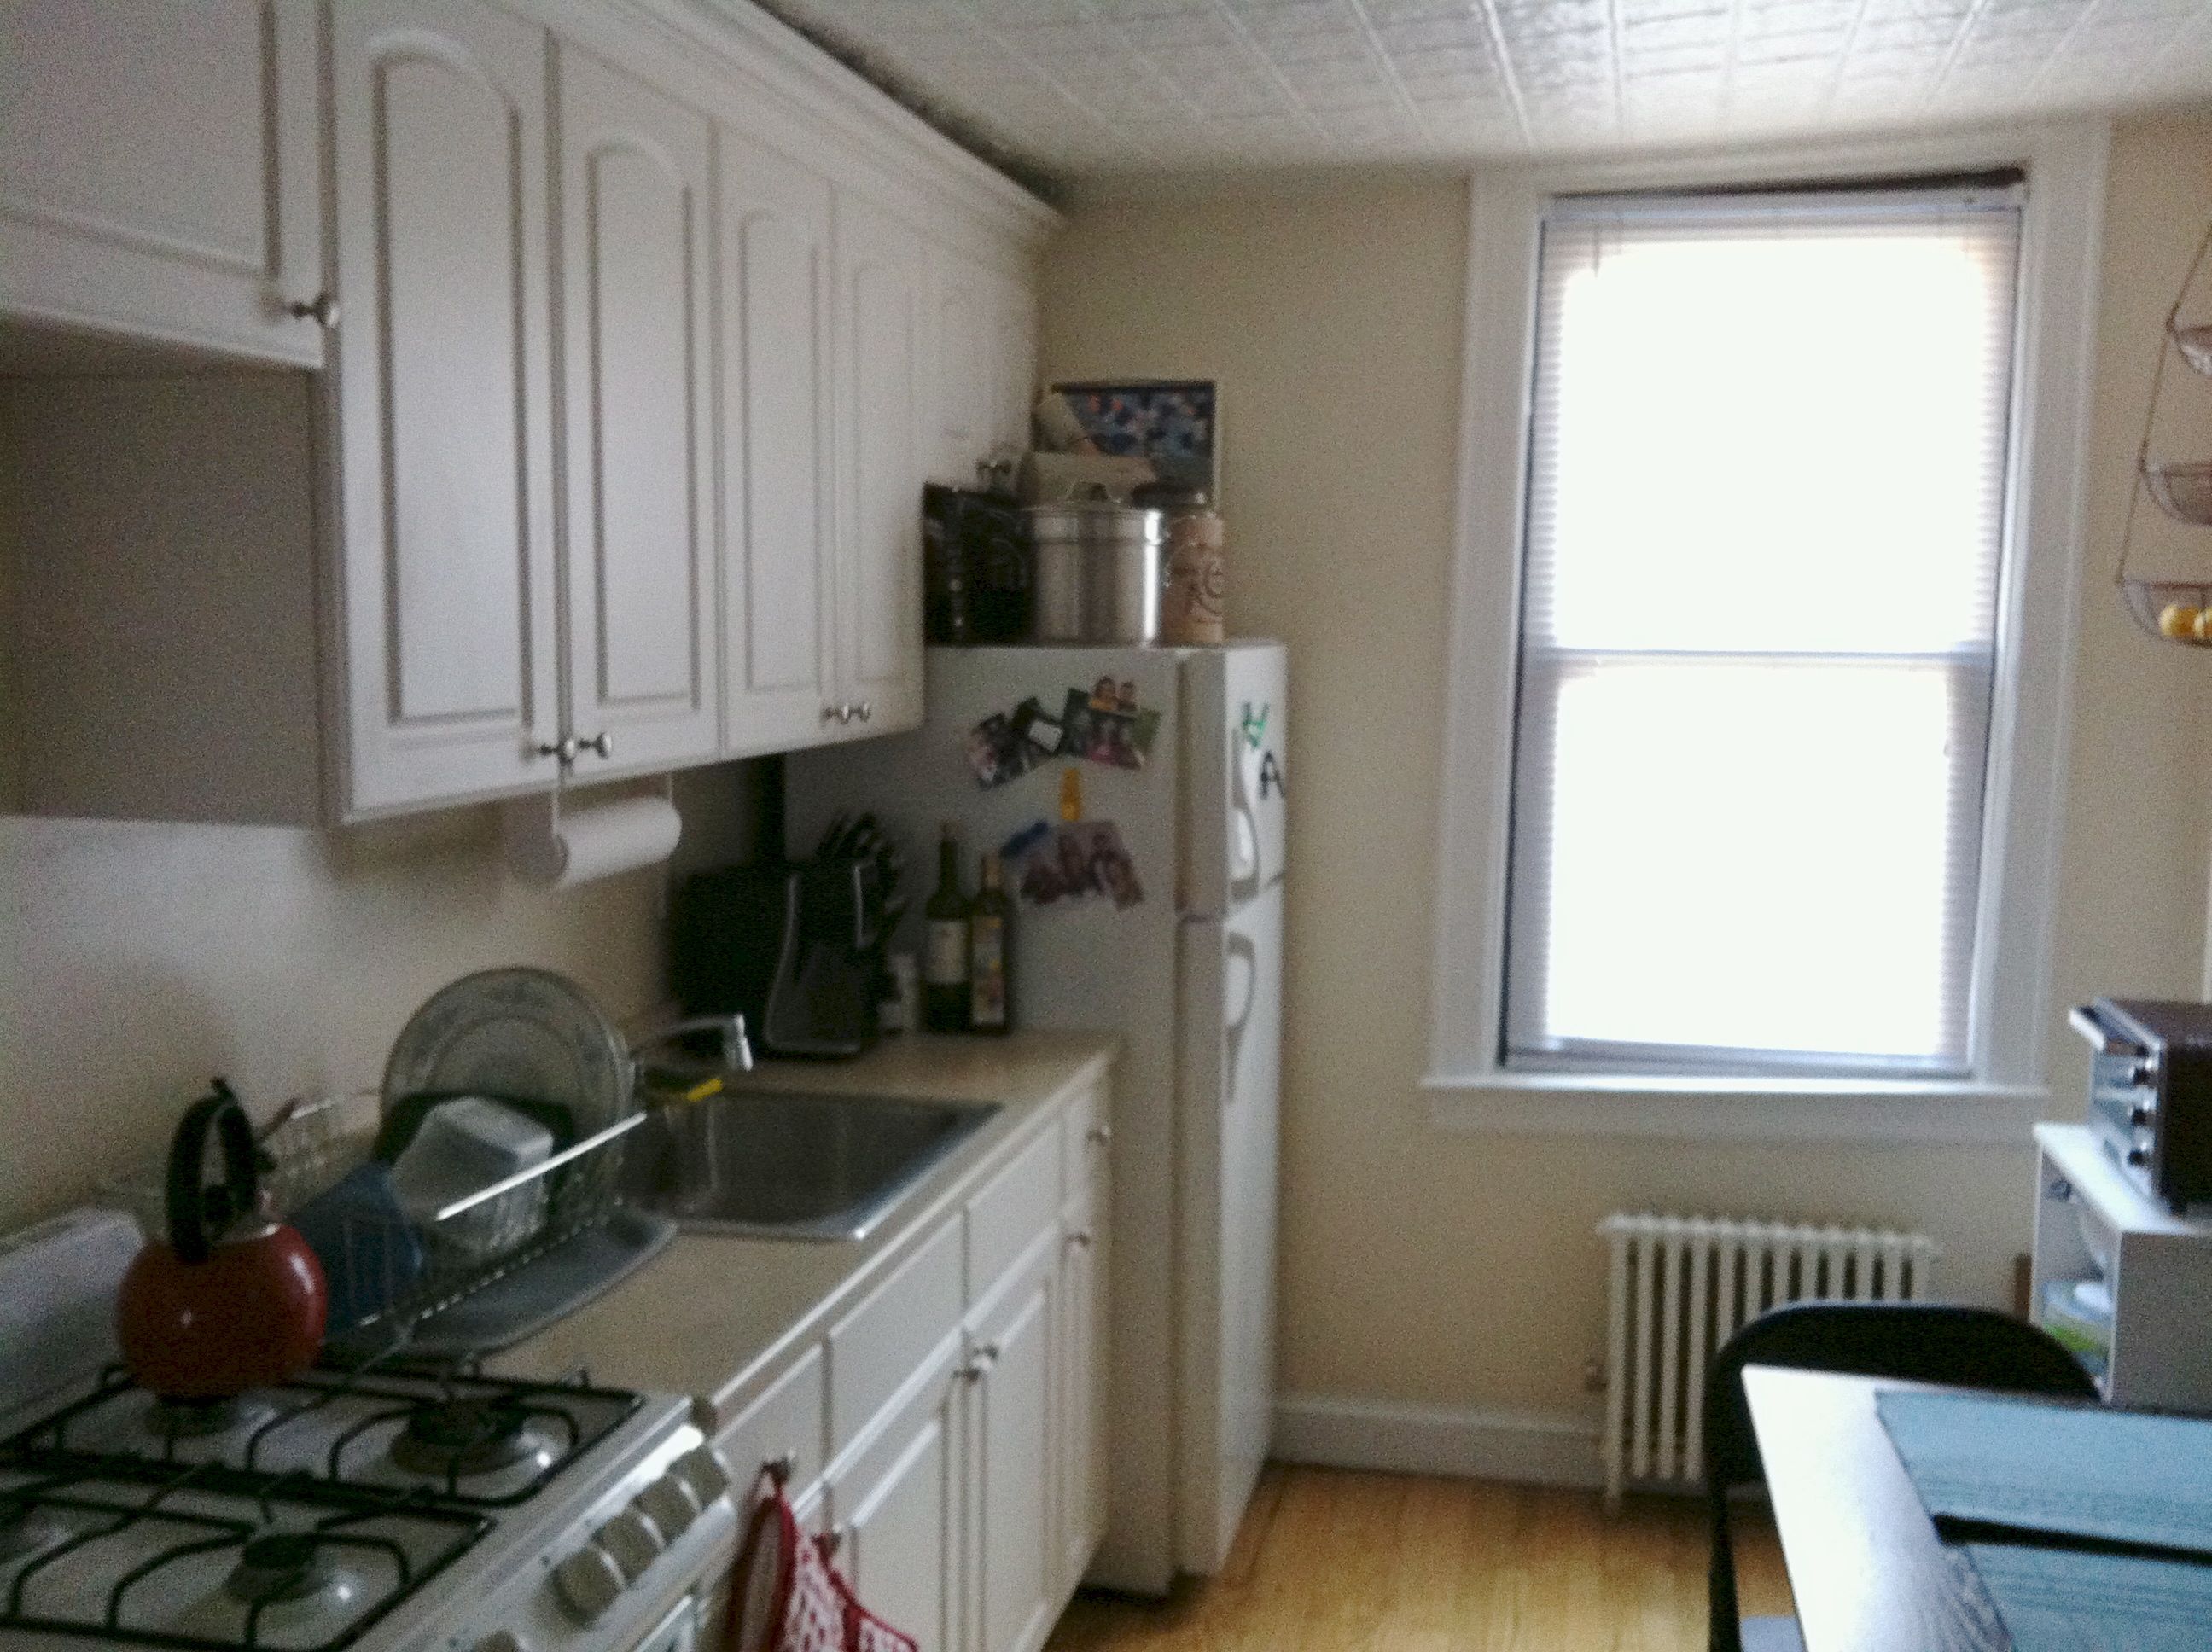 BEFORE: The kitchen, while sporting new cabinets, have decidedly shorter ceilings. And that stove was broken, and has since been replaced with our old one from upstairs.